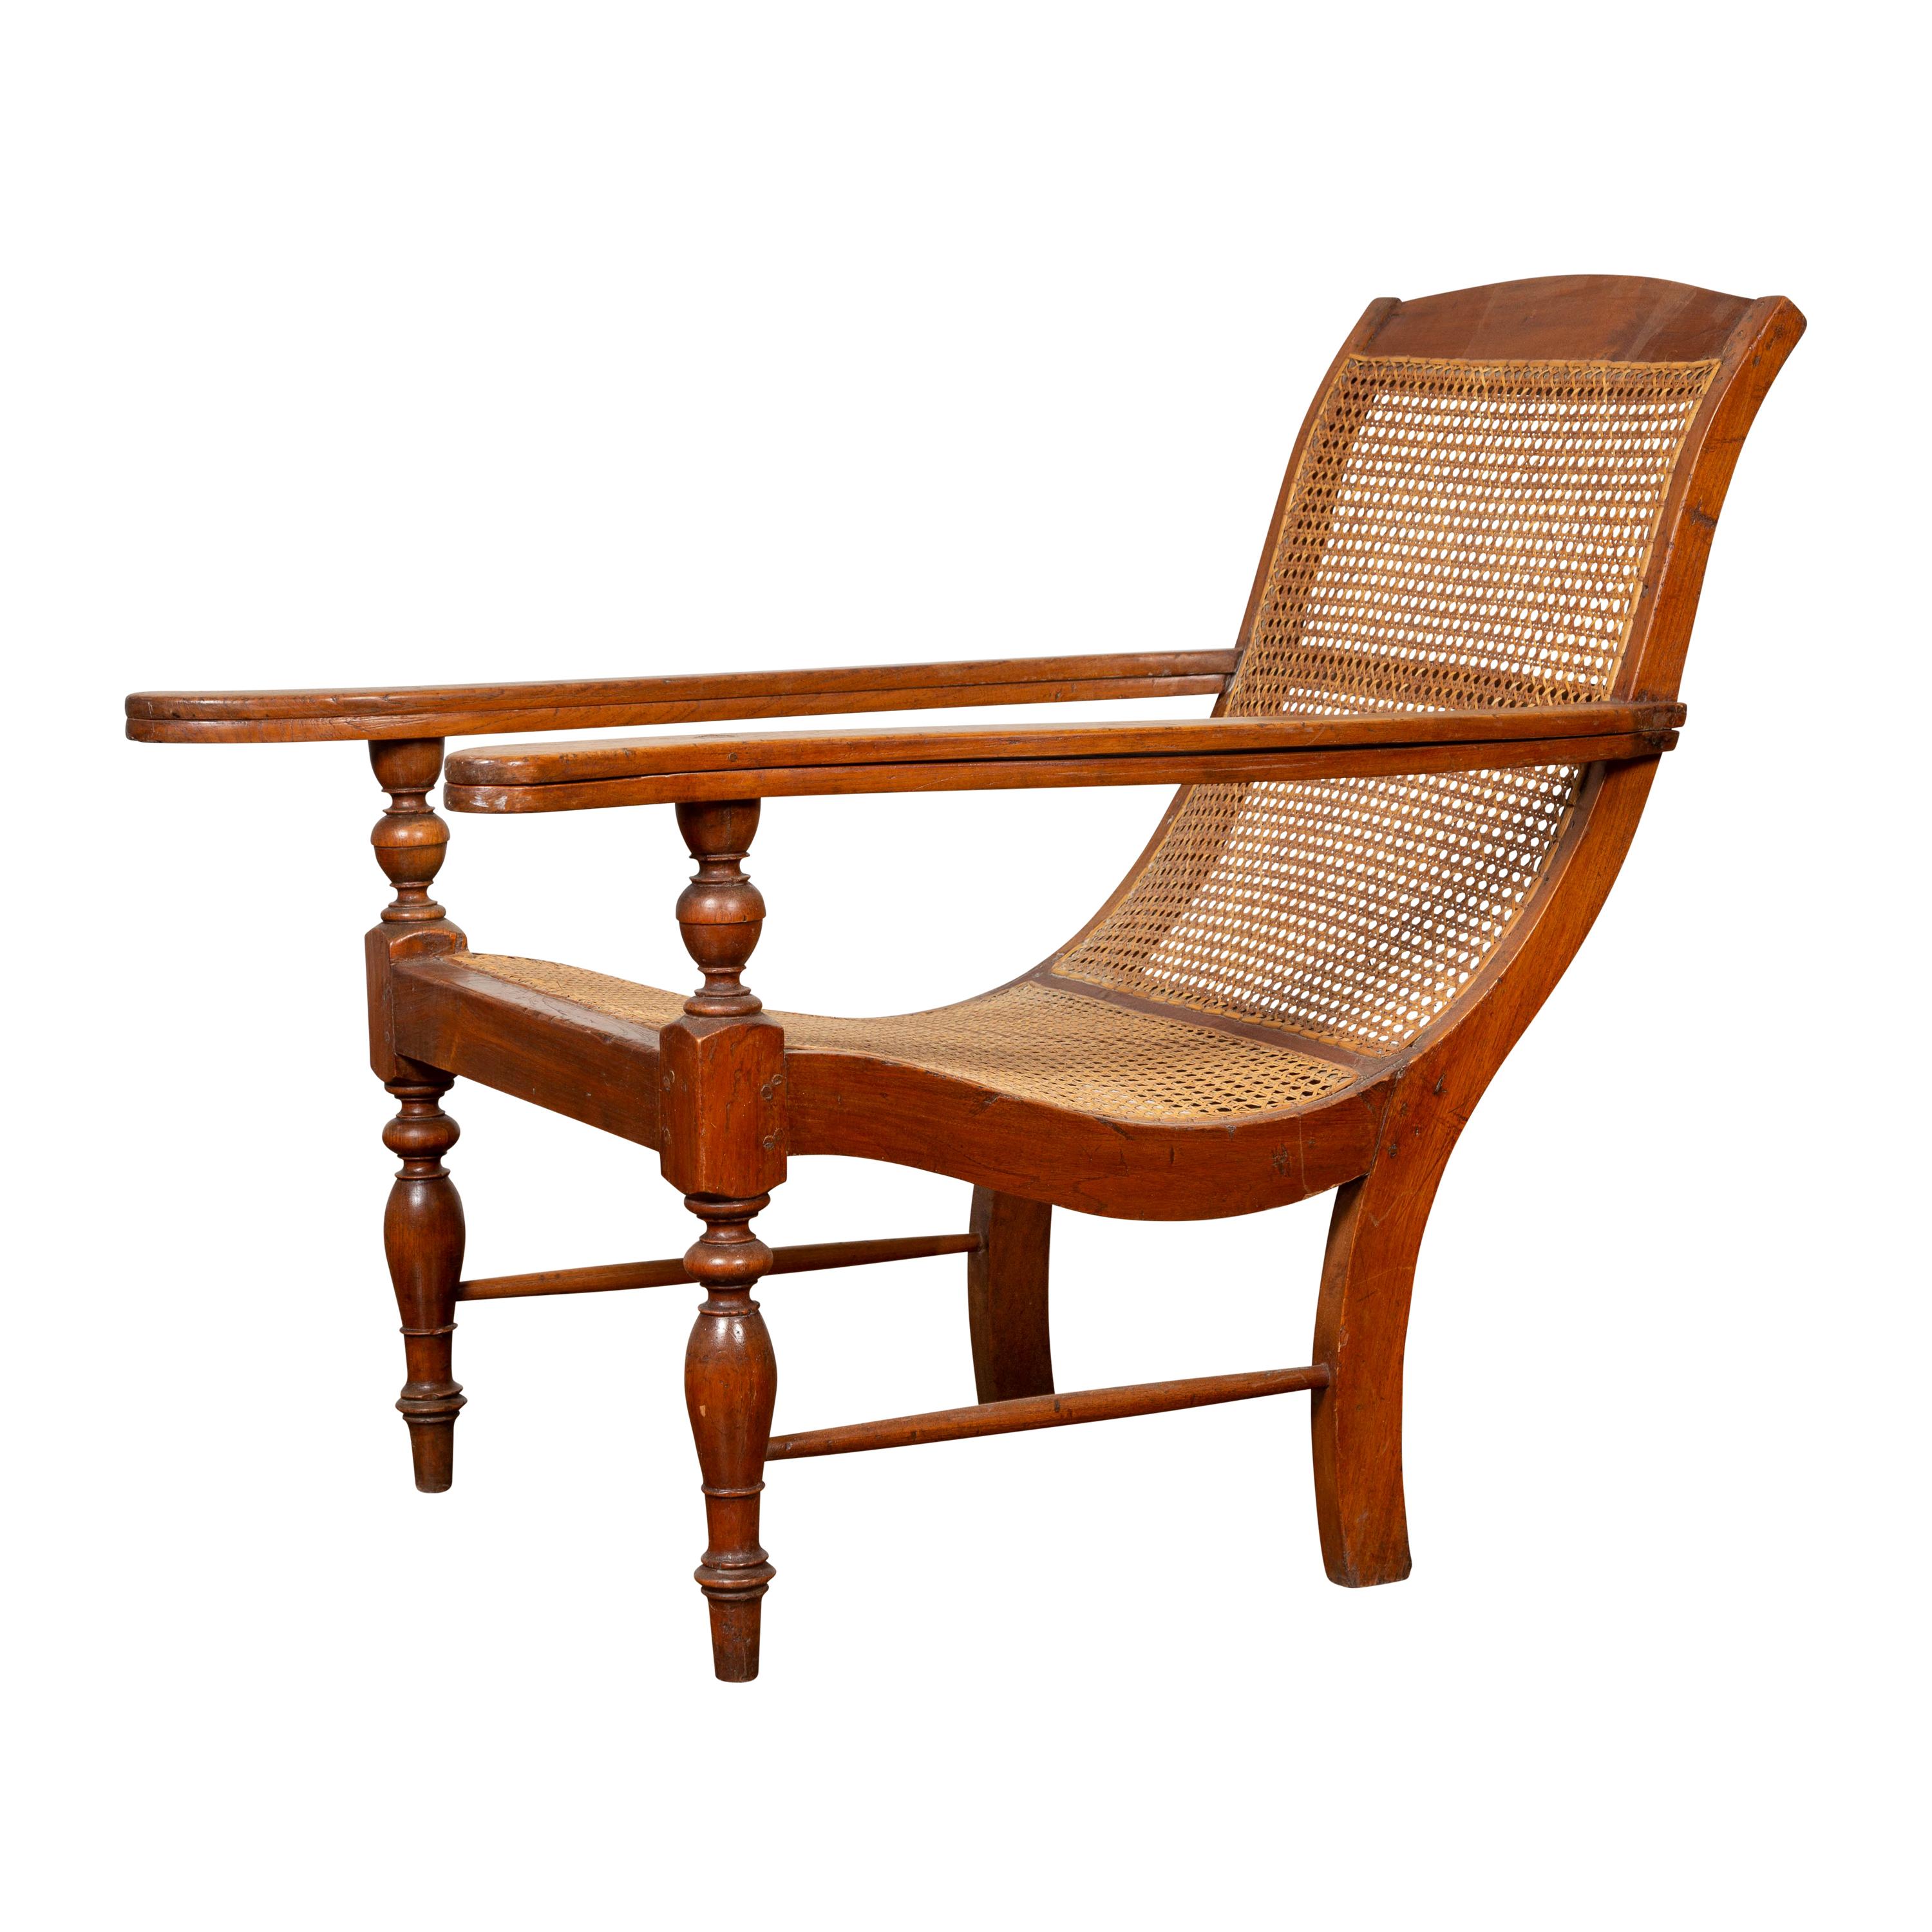 Dutch Colonial Vintage Teak Plantation Lounge Chair with Curving Seat and Rattan